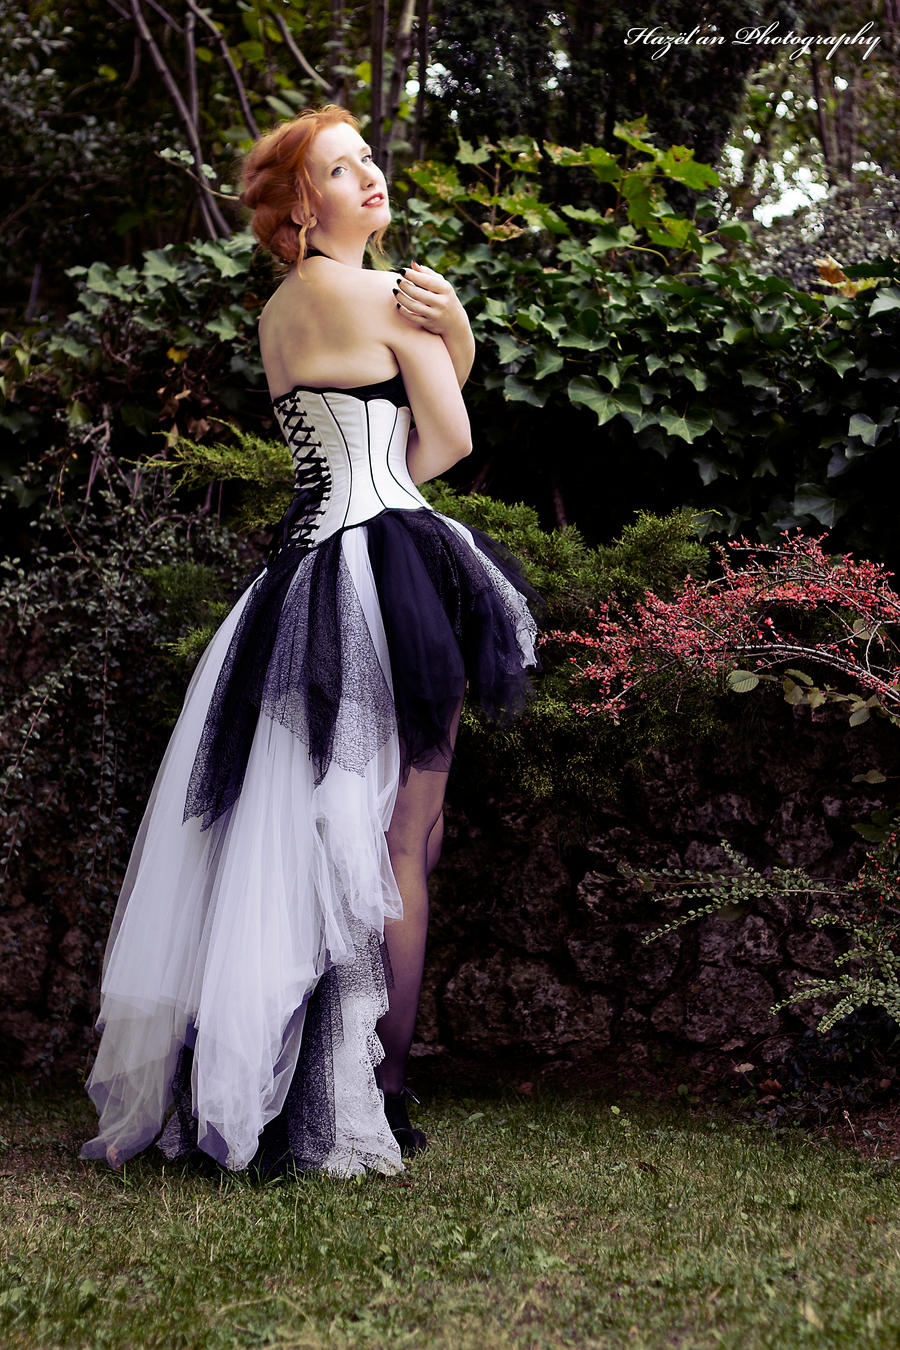 White underbust corset dress 2012 collection '' by Esaikha on